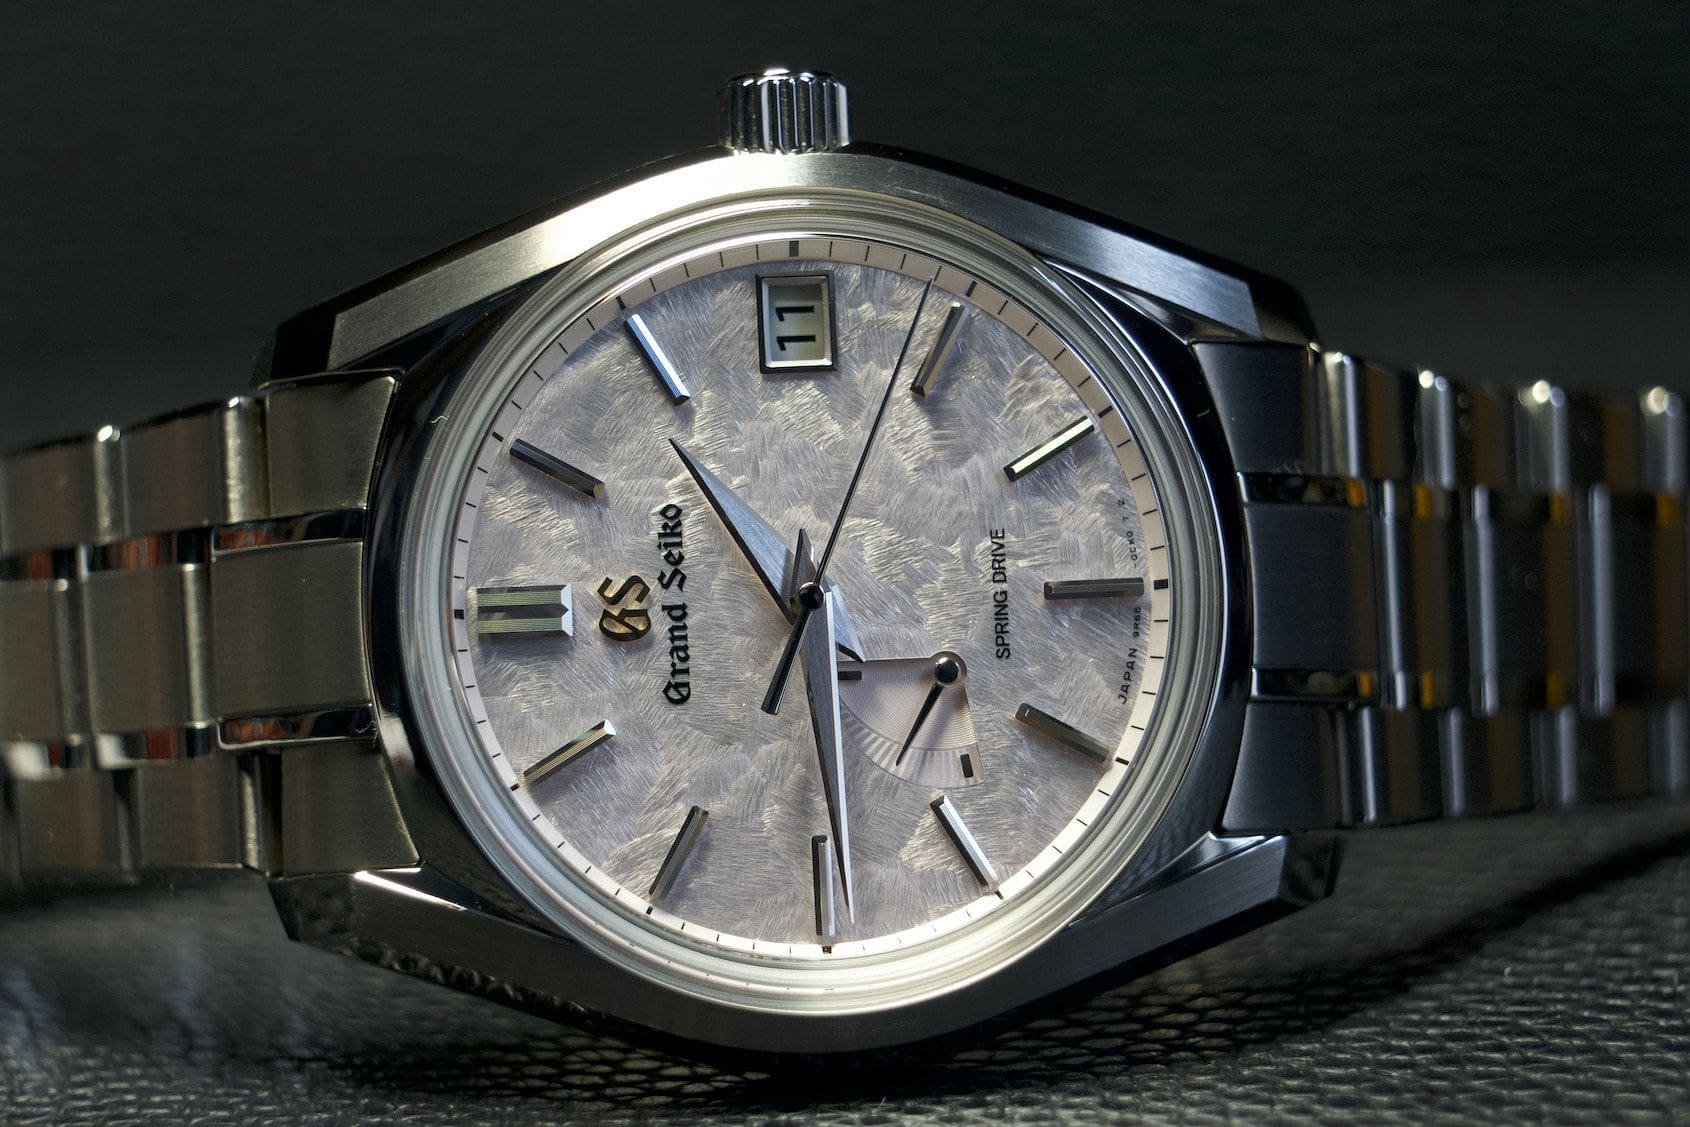 This is the Grand Seiko that changed everything for me